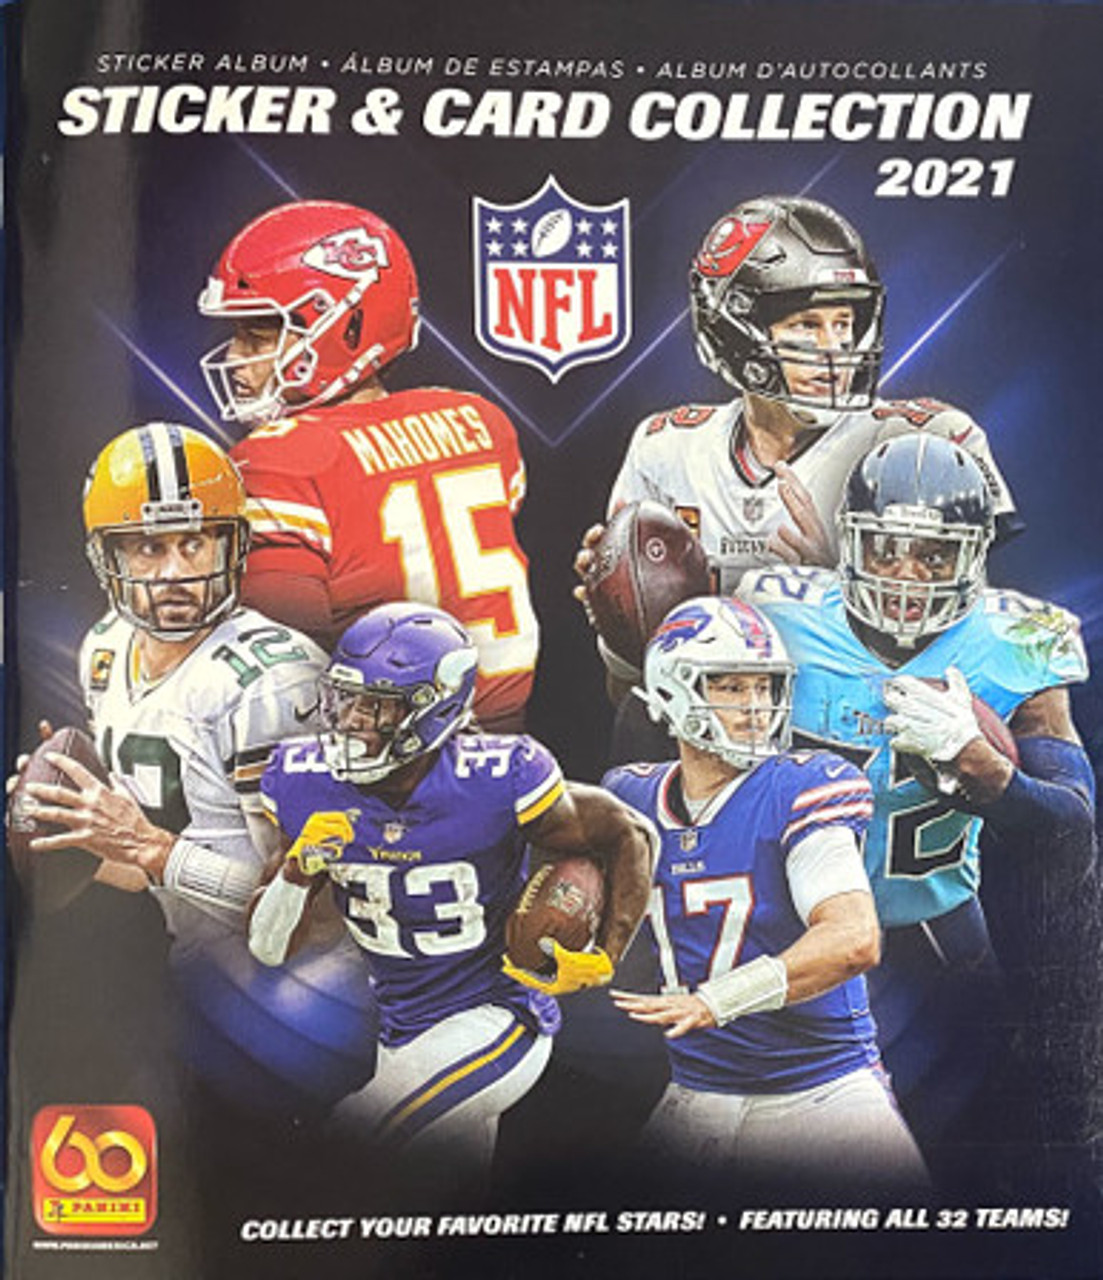 2023 Panini Football Sticker Collection Pack [5 Stickers + 1 Card